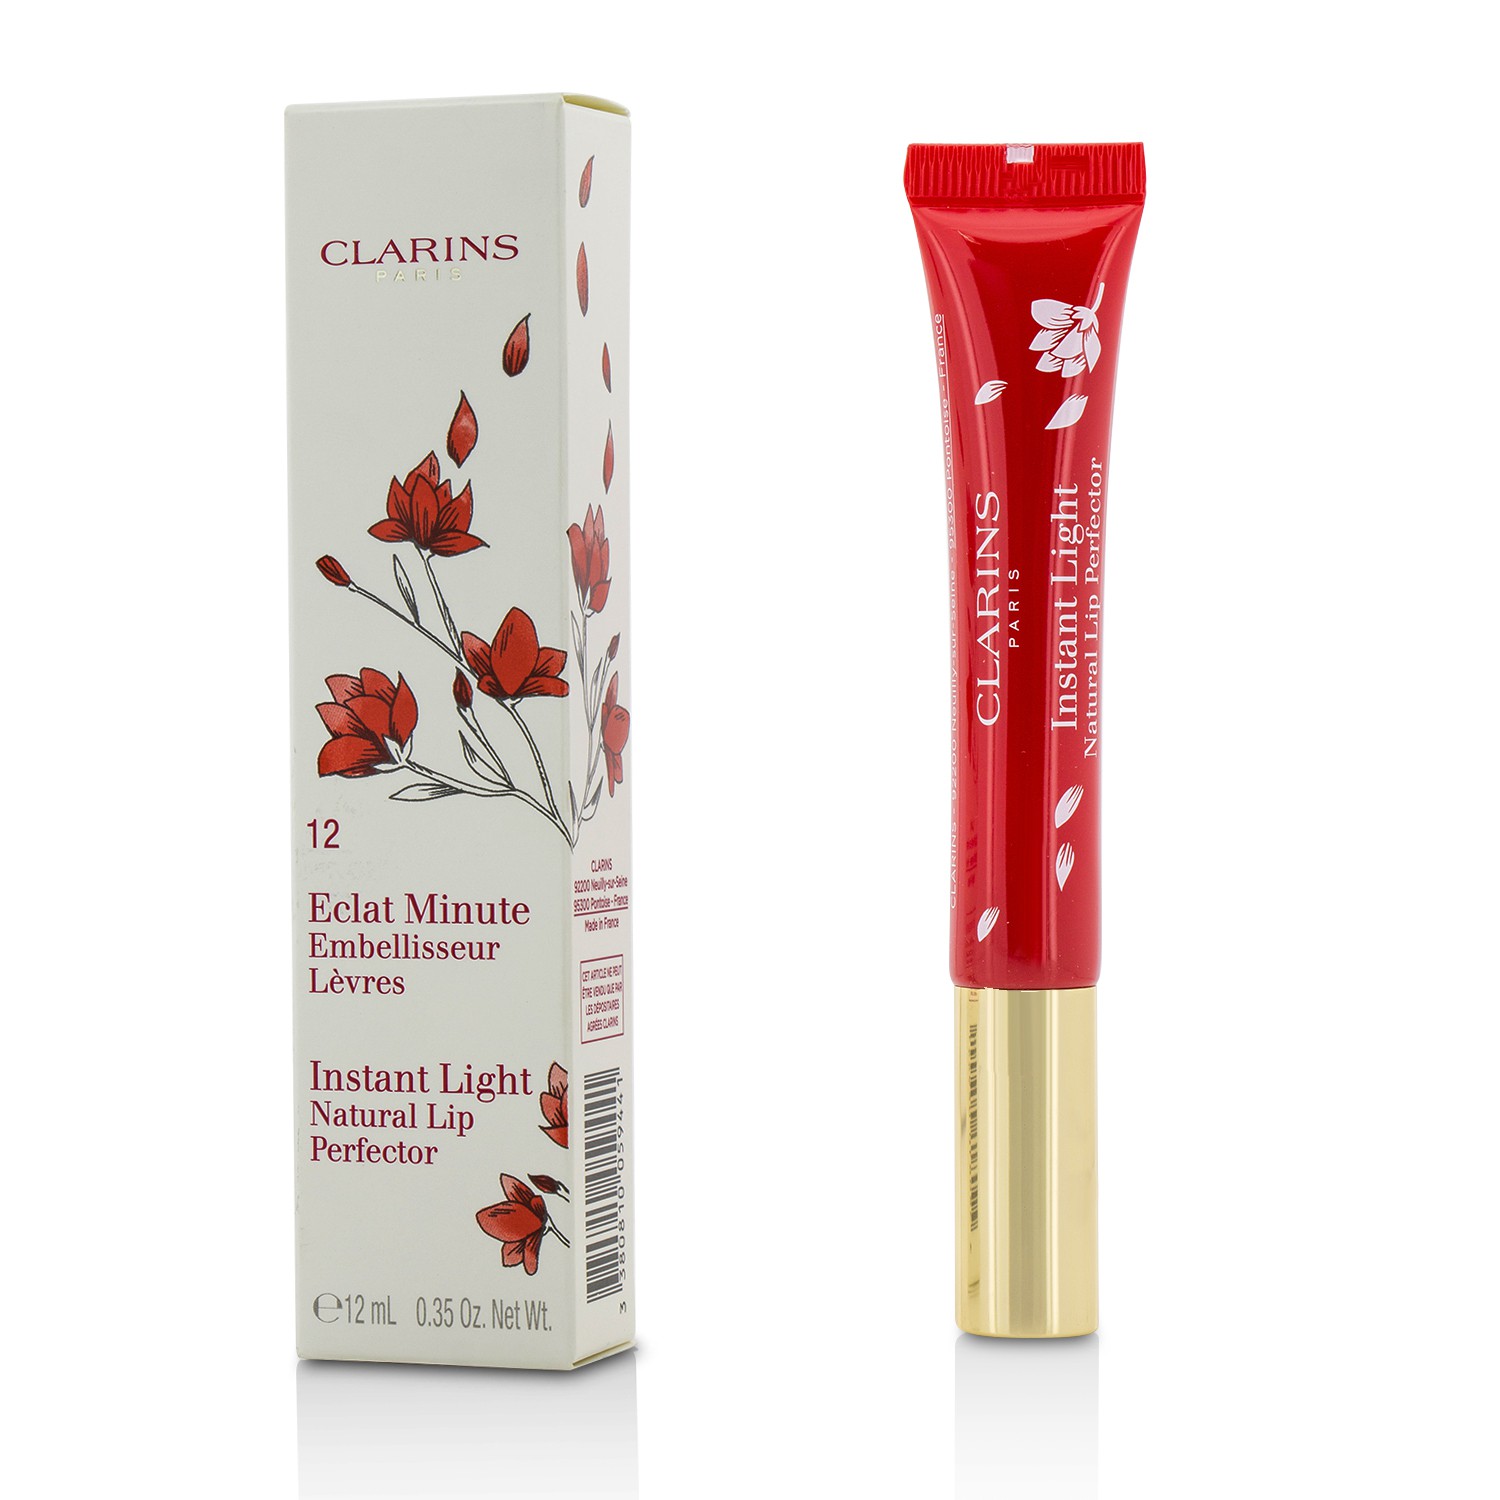 Eclat Minute Instant Light Natural Lip Perfector - # 12 Red Shimmer Clarins Image